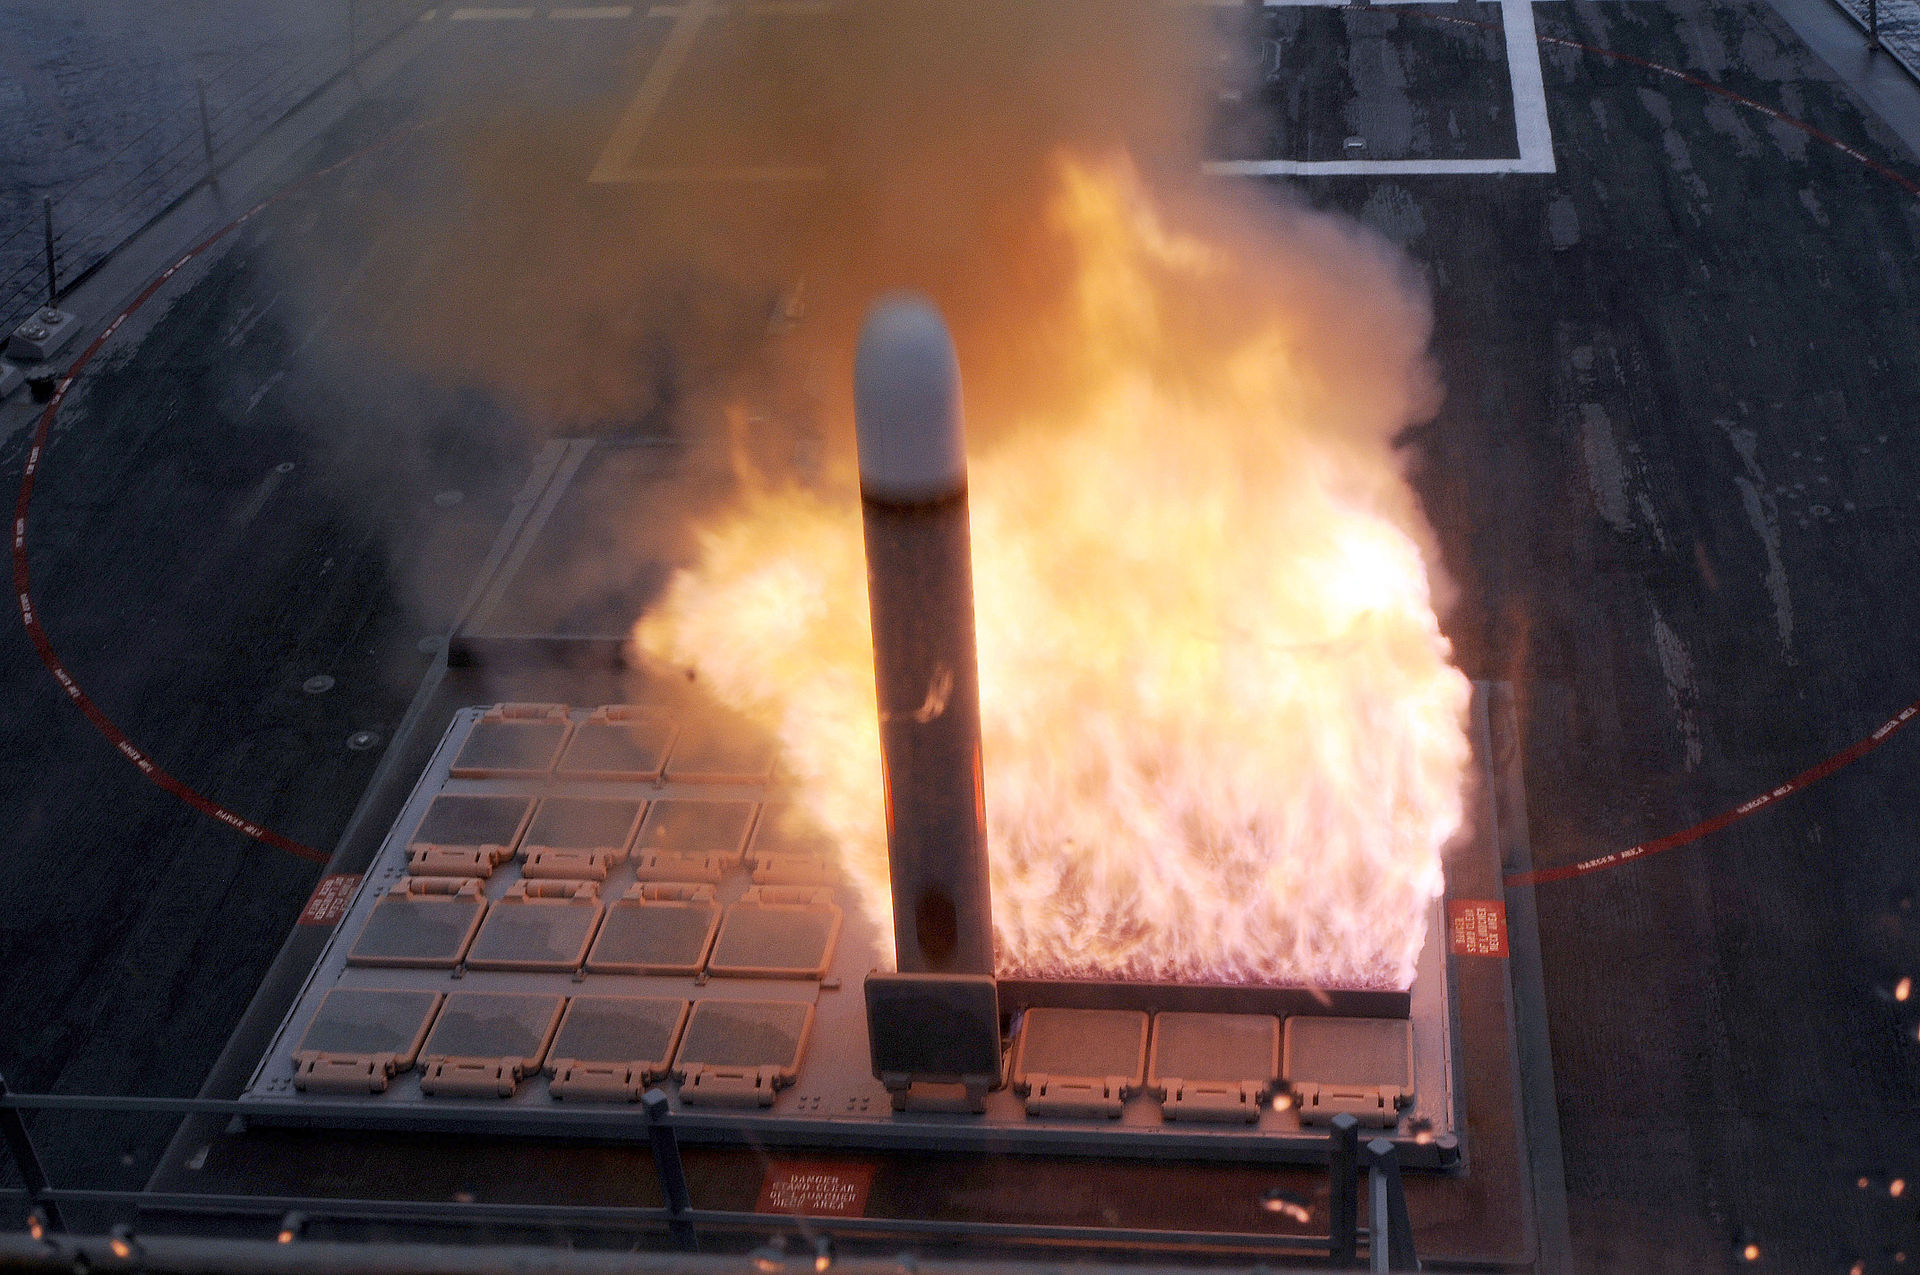 Tomahawk cruise missile launched from a MK 41 VLS tube on the USS Farragut (DDG-99) US Navy Photo